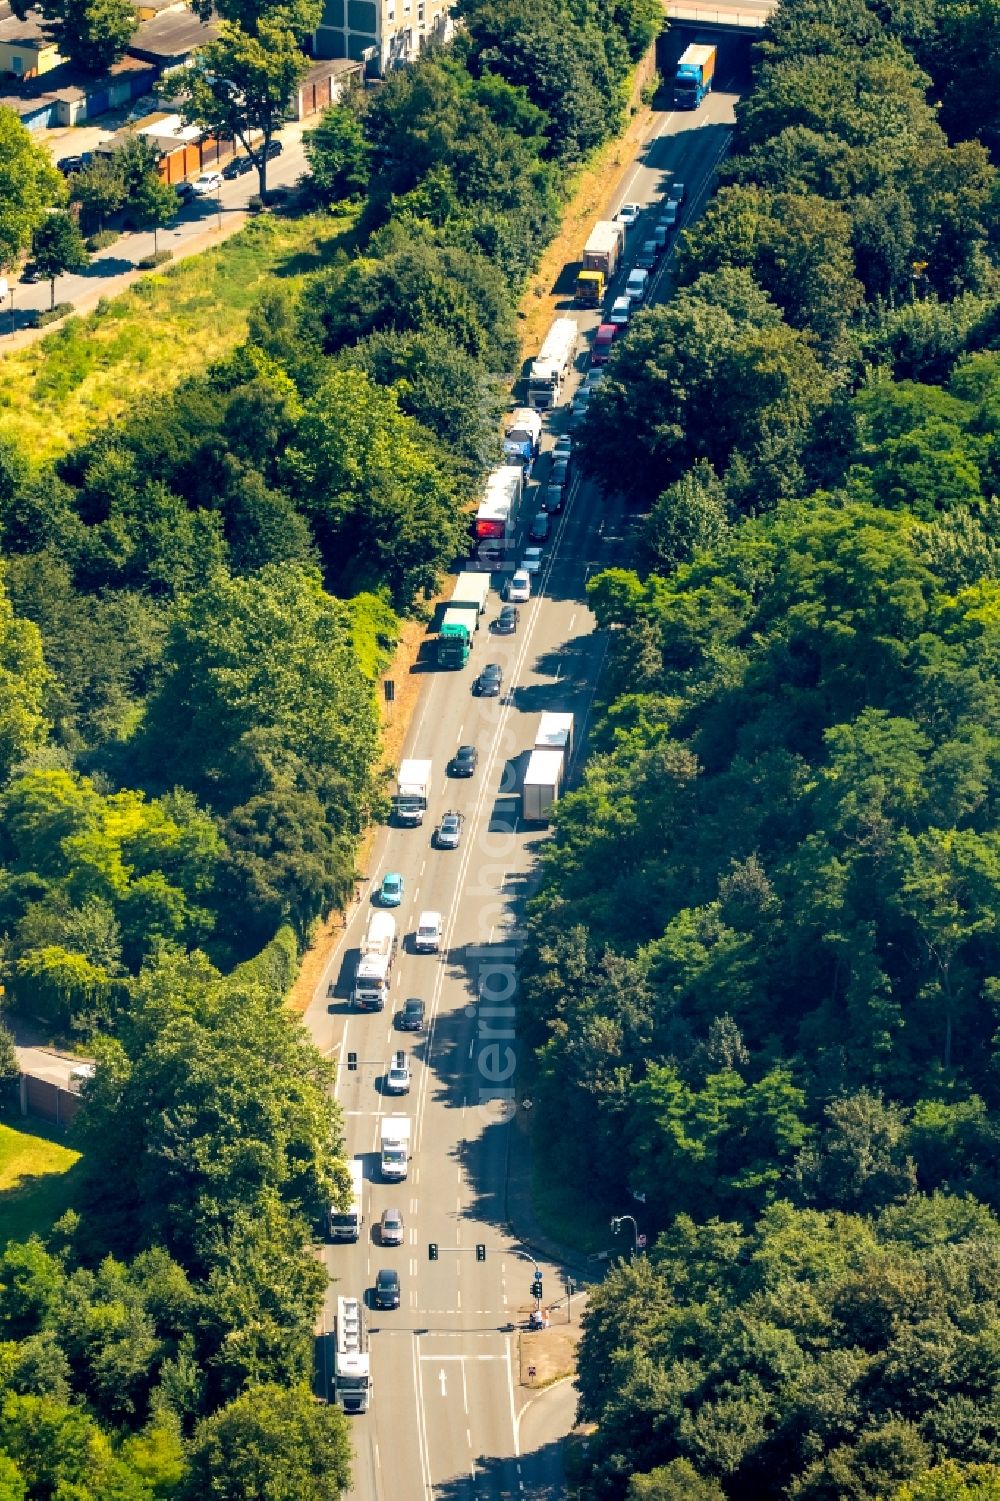 Gladbeck from above - Motor vehicles in traffic along the Fereral street B224 in Gladbeck in the state North Rhine-Westphalia